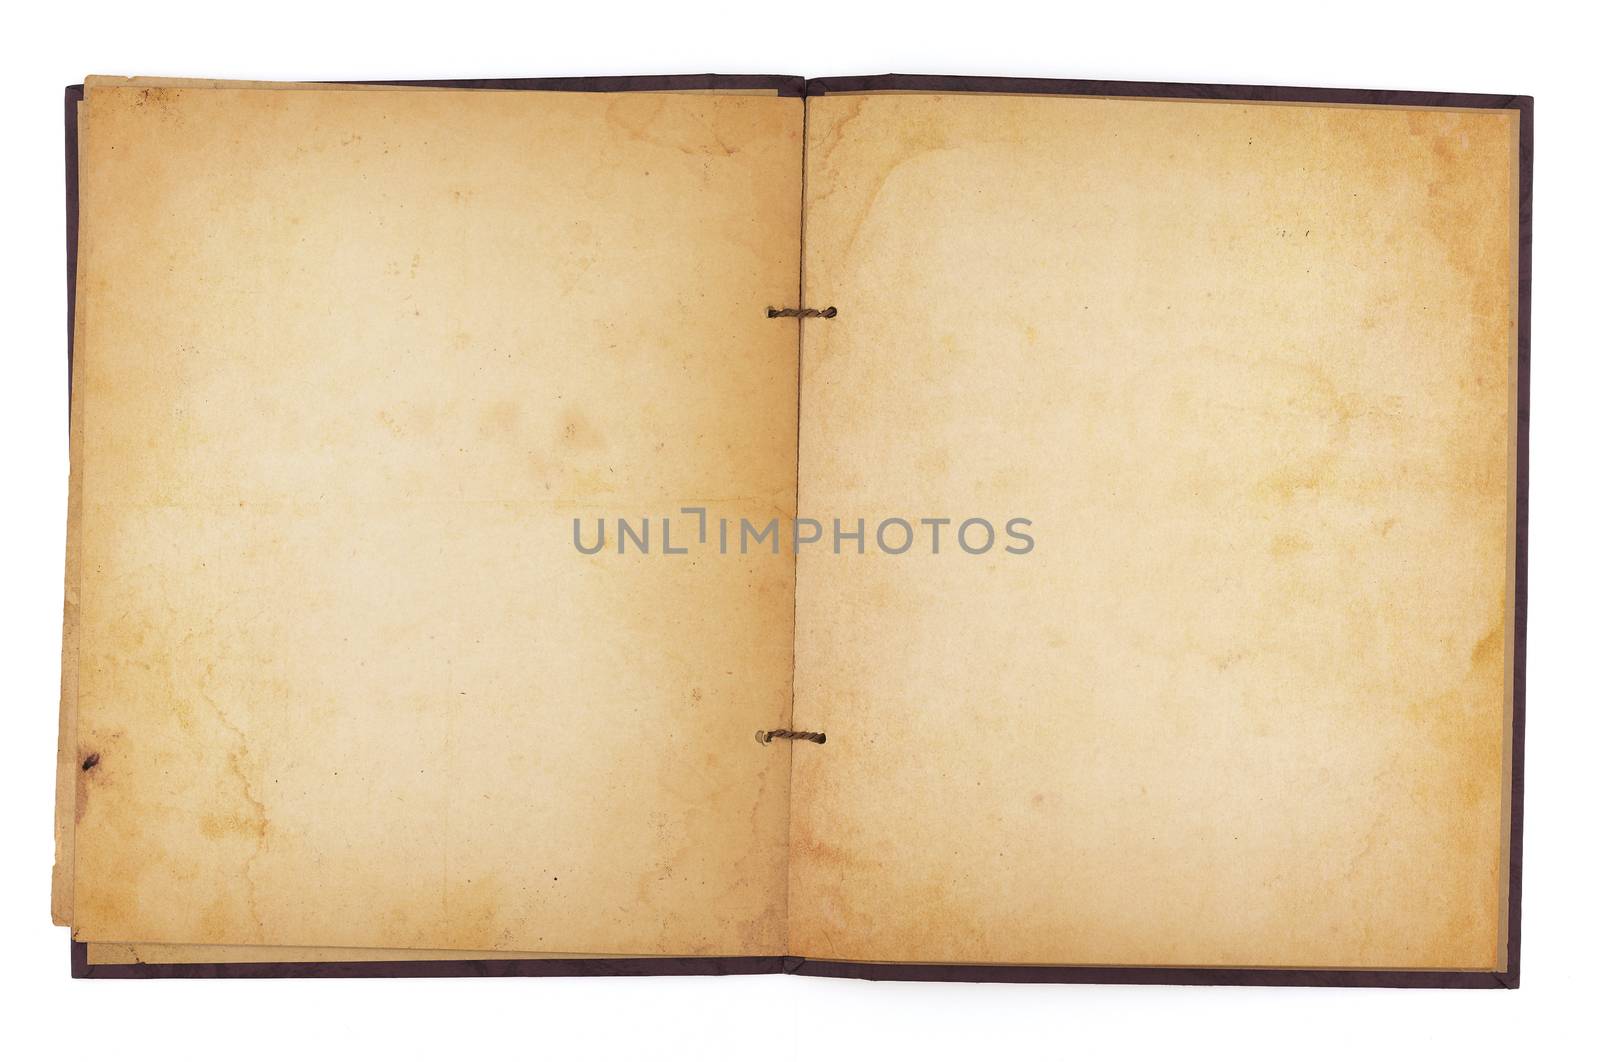 An aging scrapbook open to reveal blank, yellowing water-stained pages. Isolated on white. Includes clipping path.
